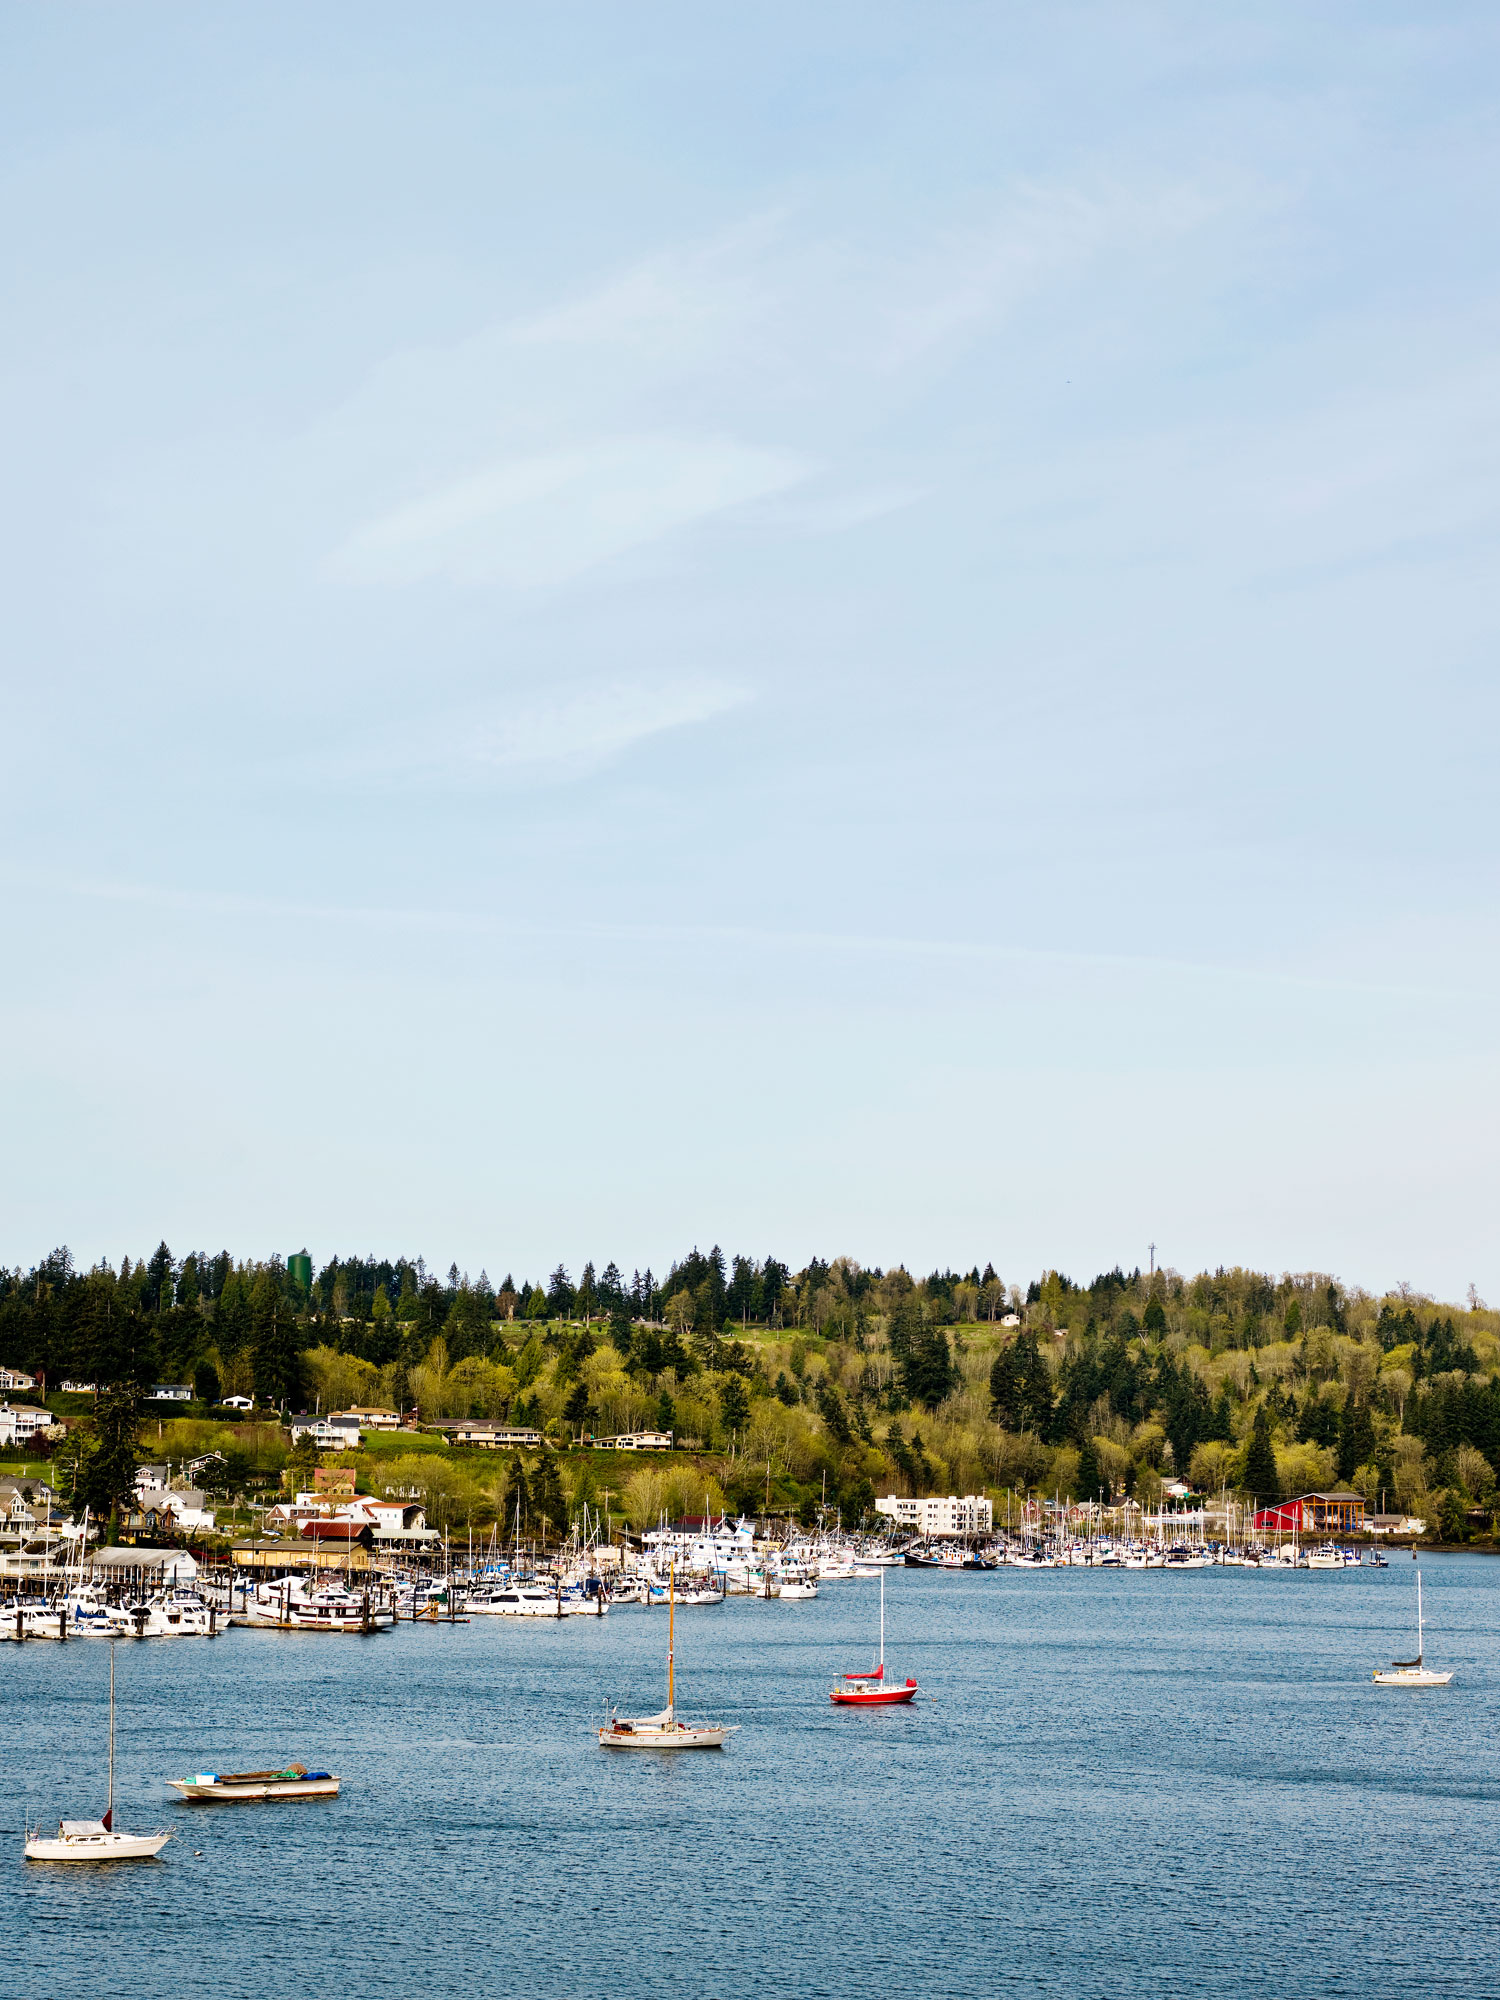 A Day in Gig Harbor